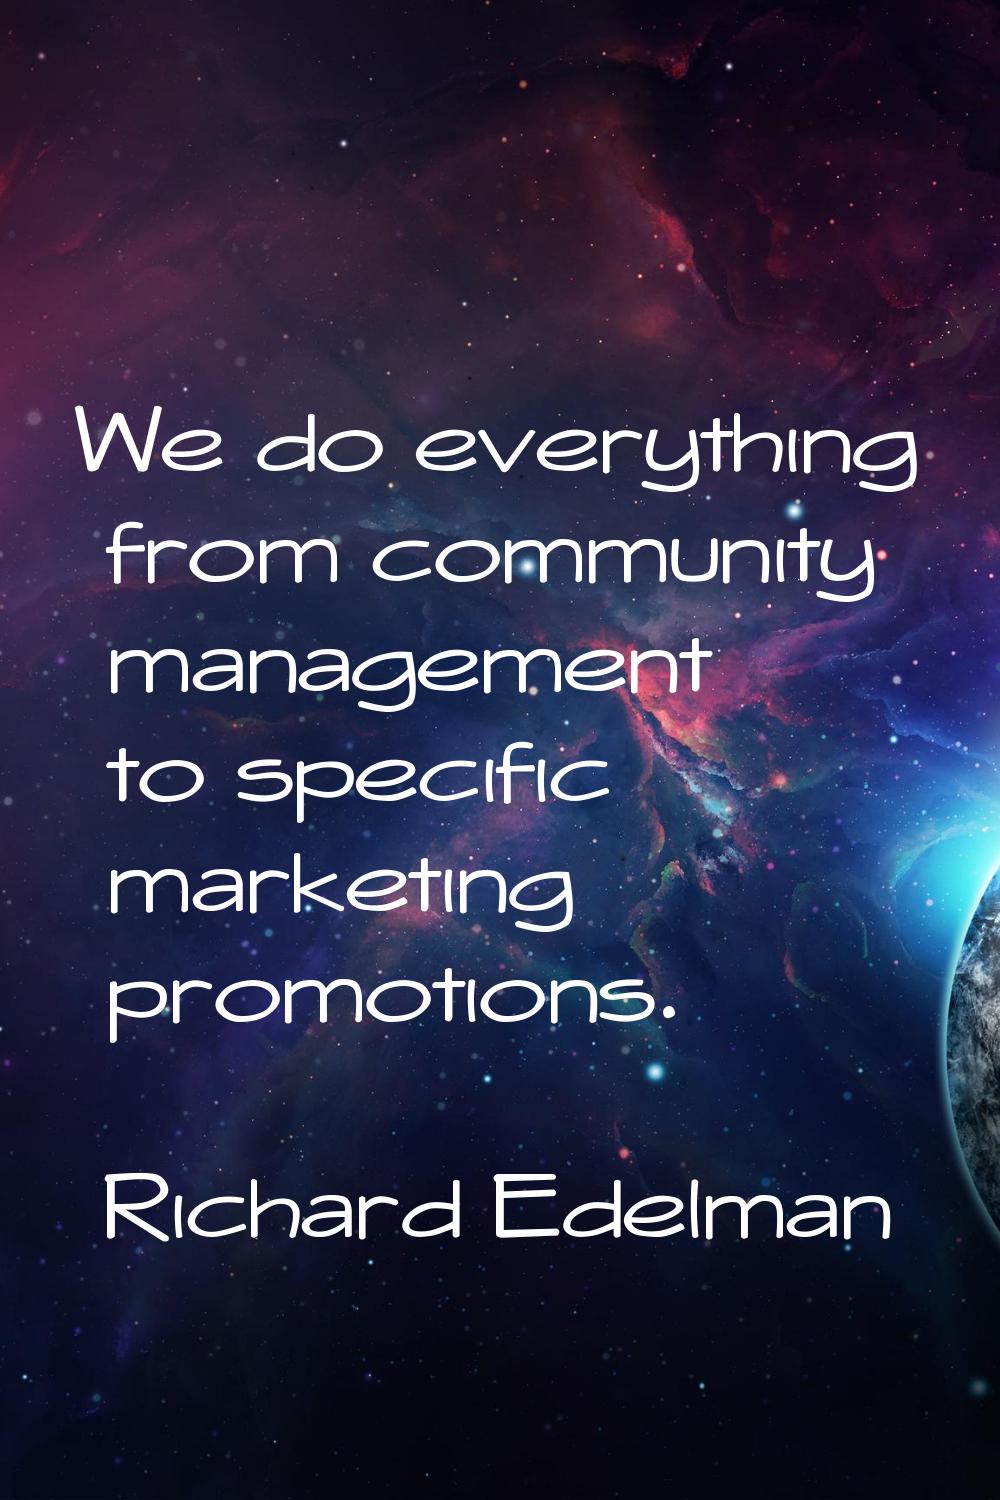 We do everything from community management to specific marketing promotions.